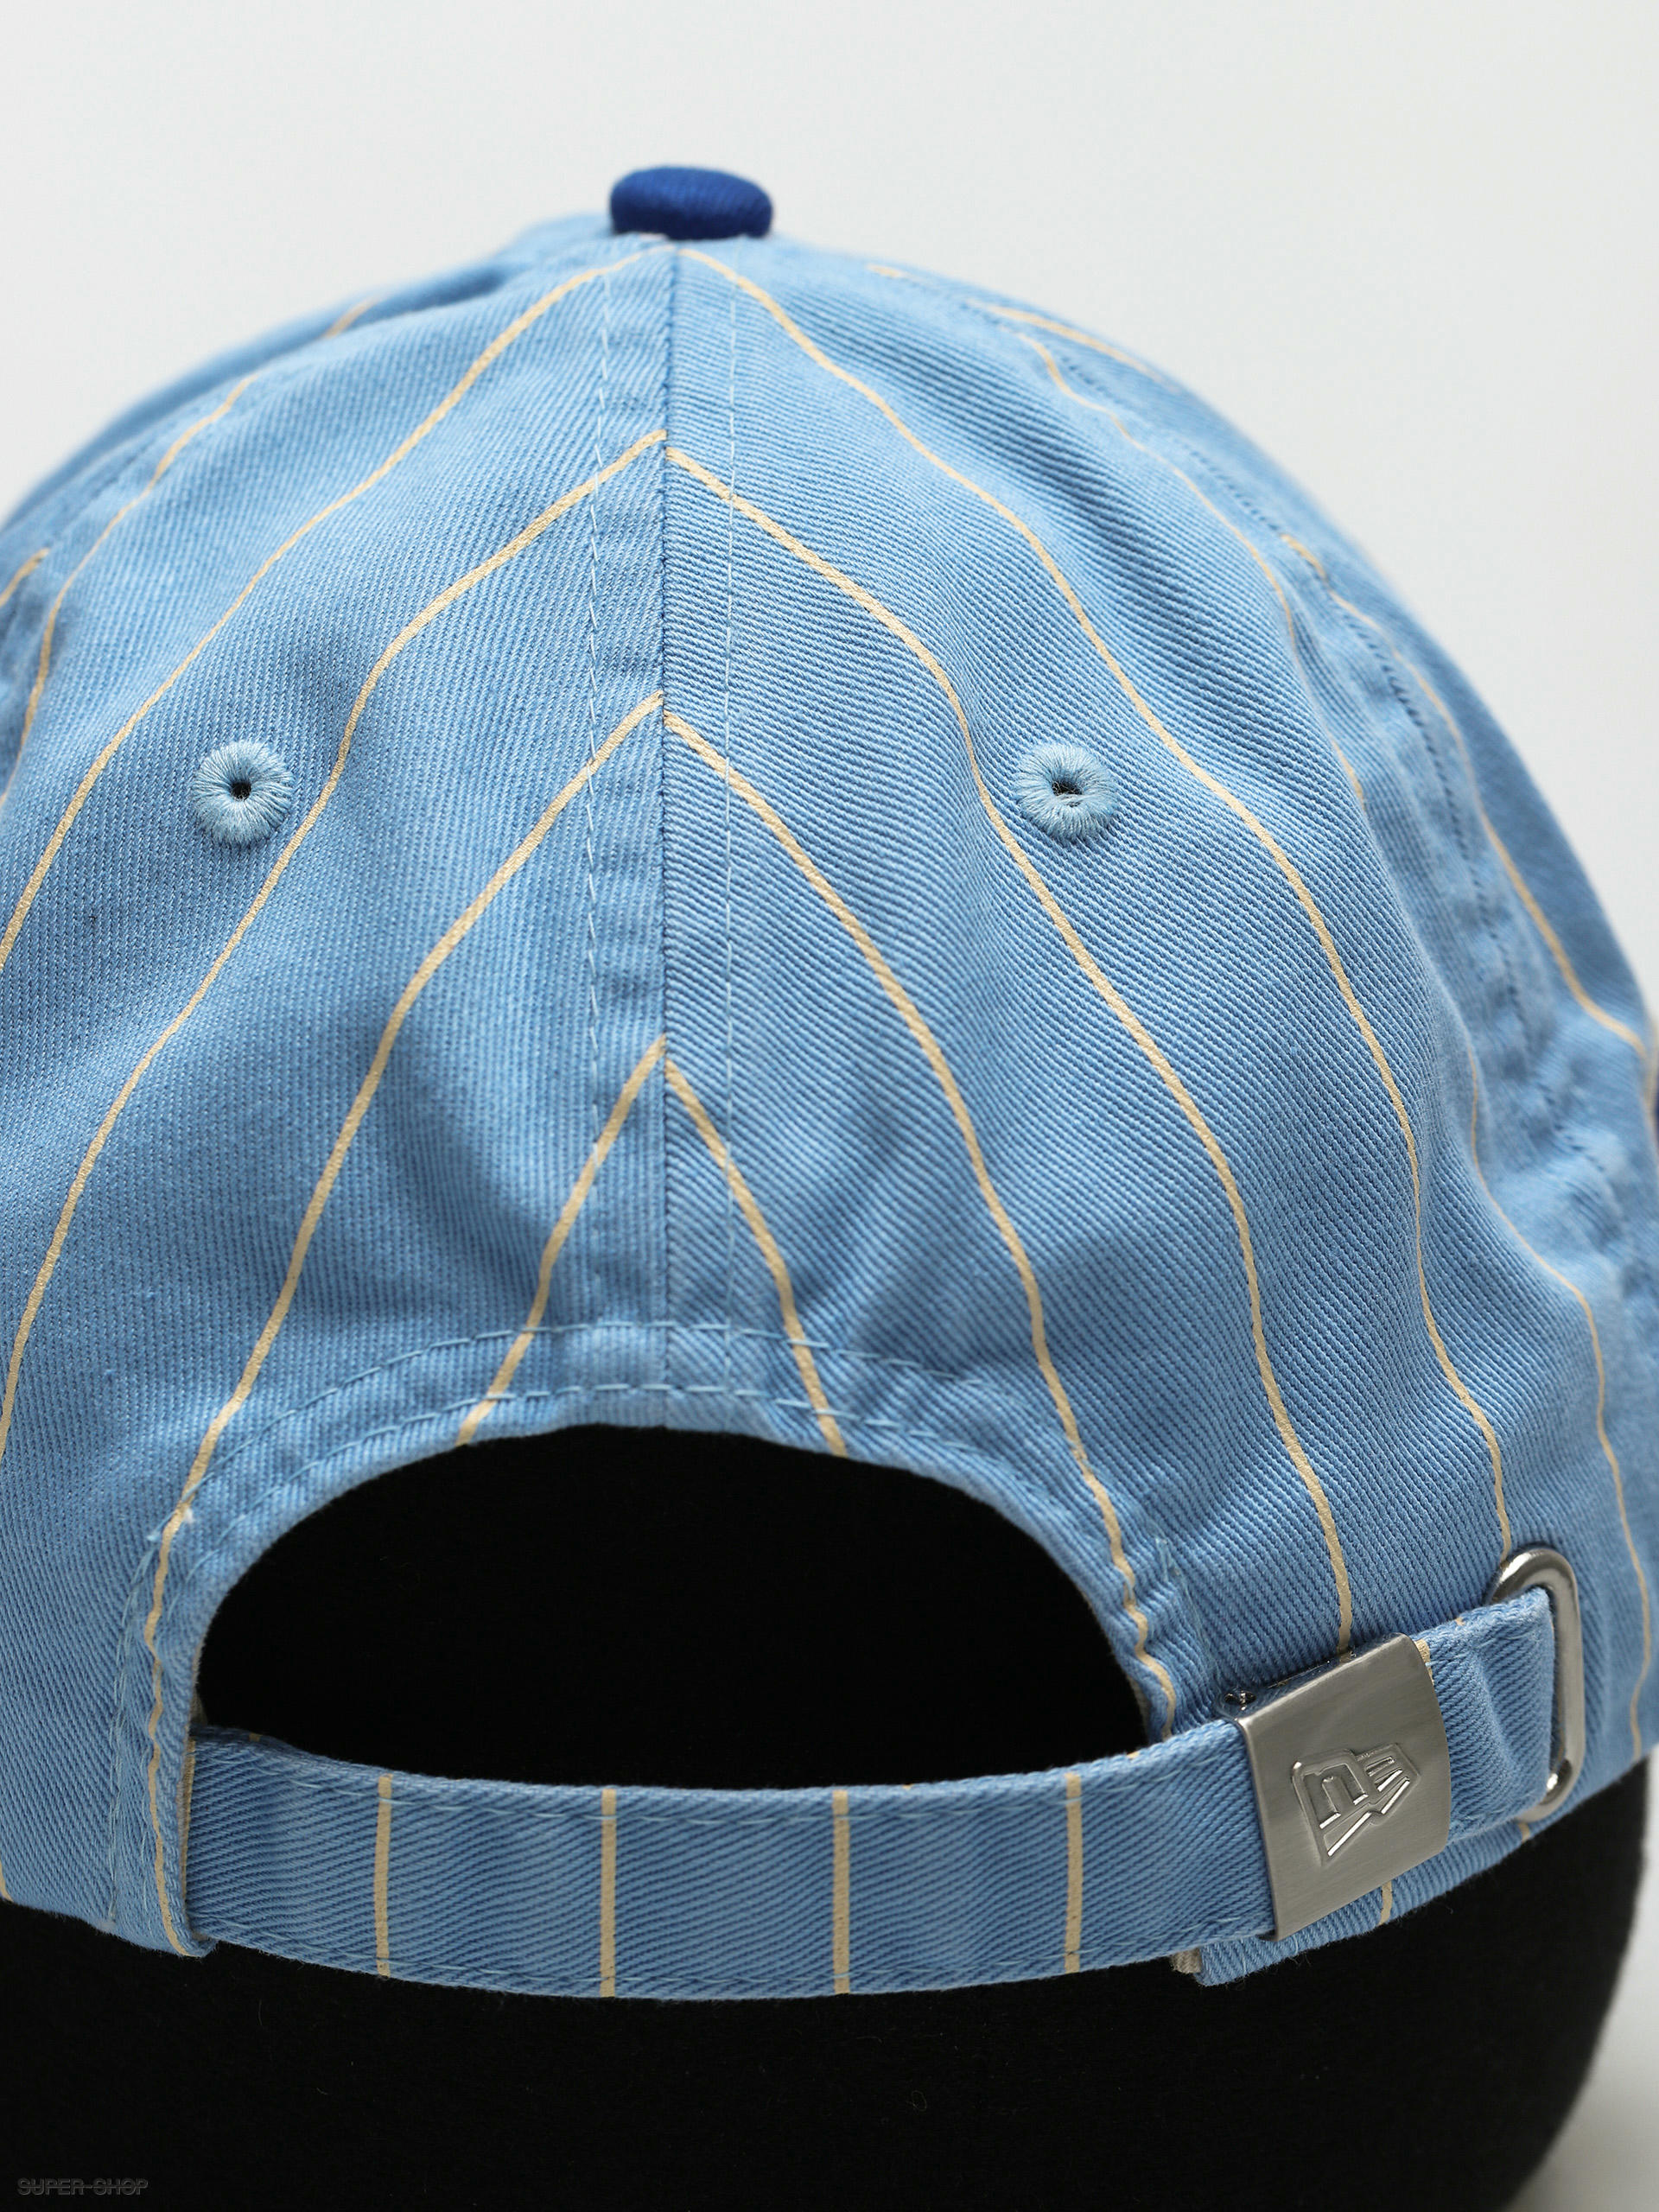 New Era MLB Coop 9Fifty Rc Stlcarco - 60364466 - Sneakersnstuff